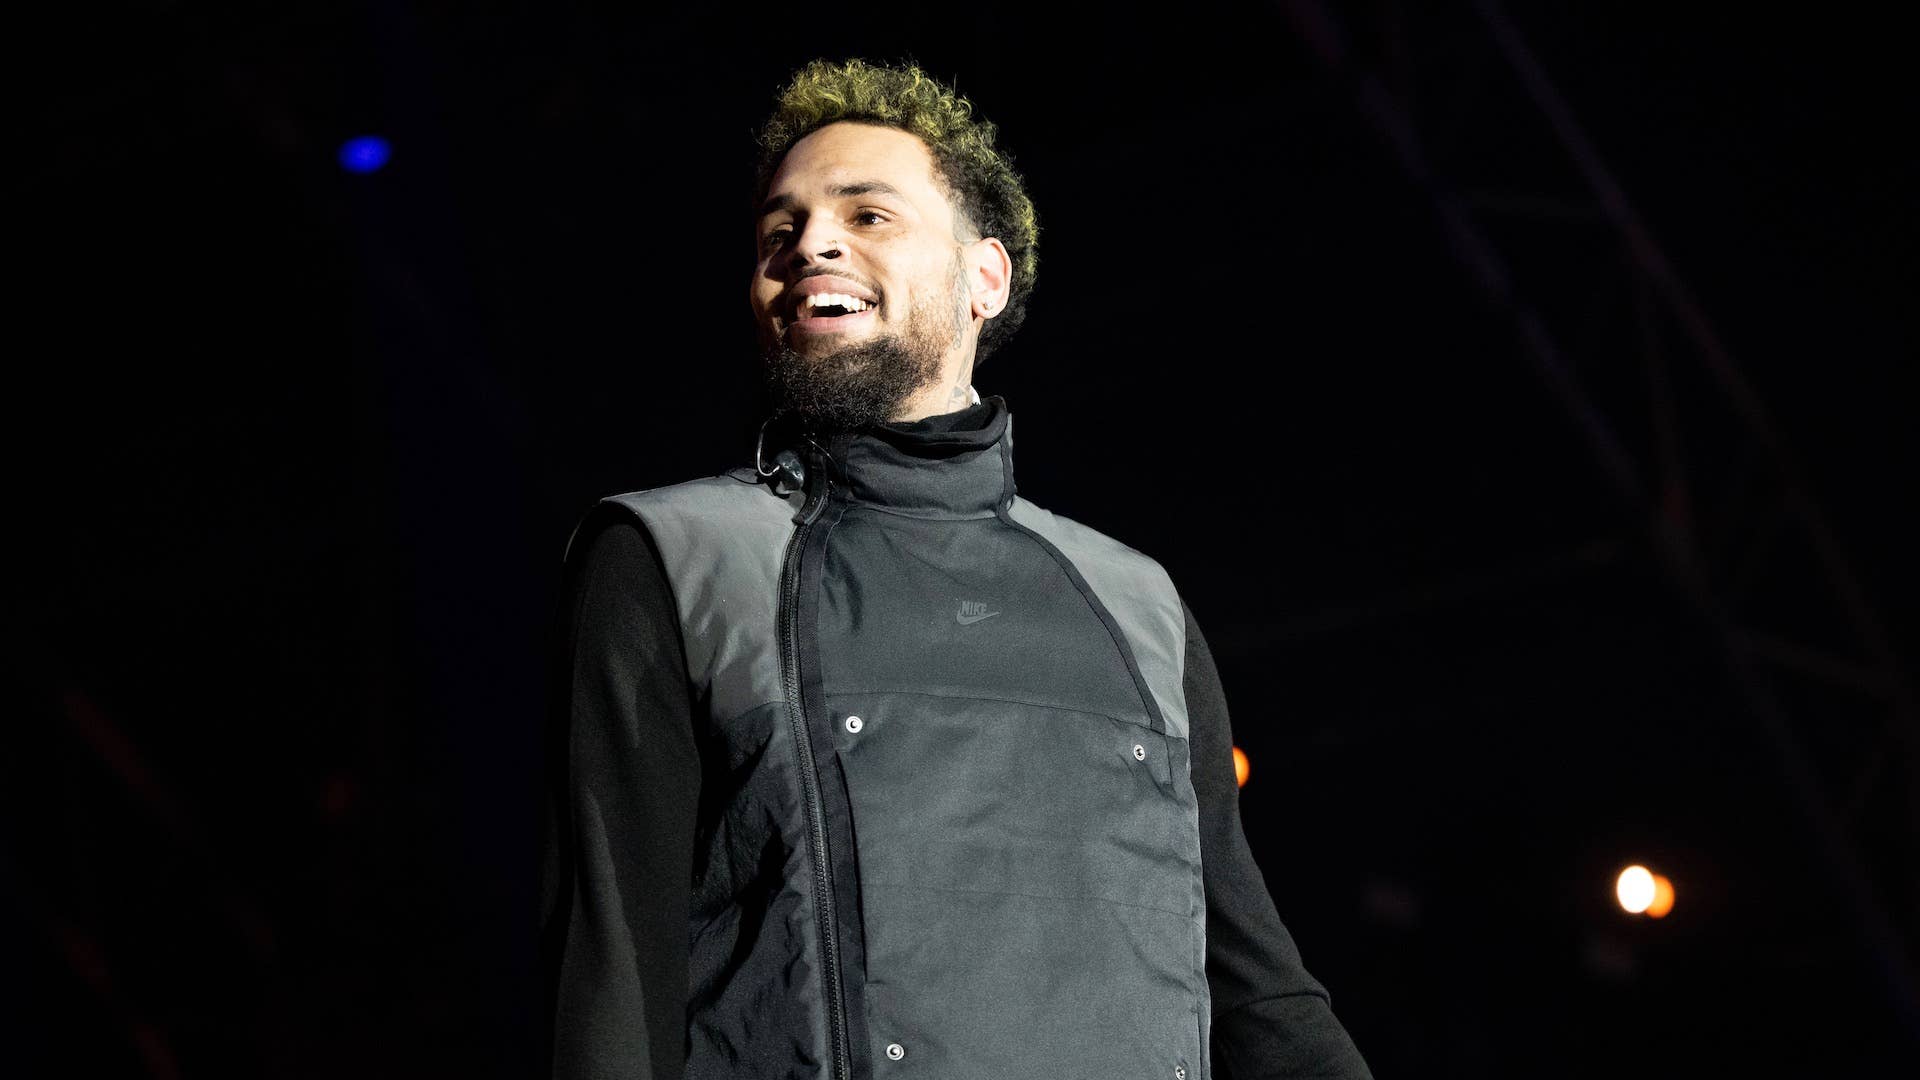 Rapper Chris Brown performs onstage during day 2 of Rolling Loud Los Angeles